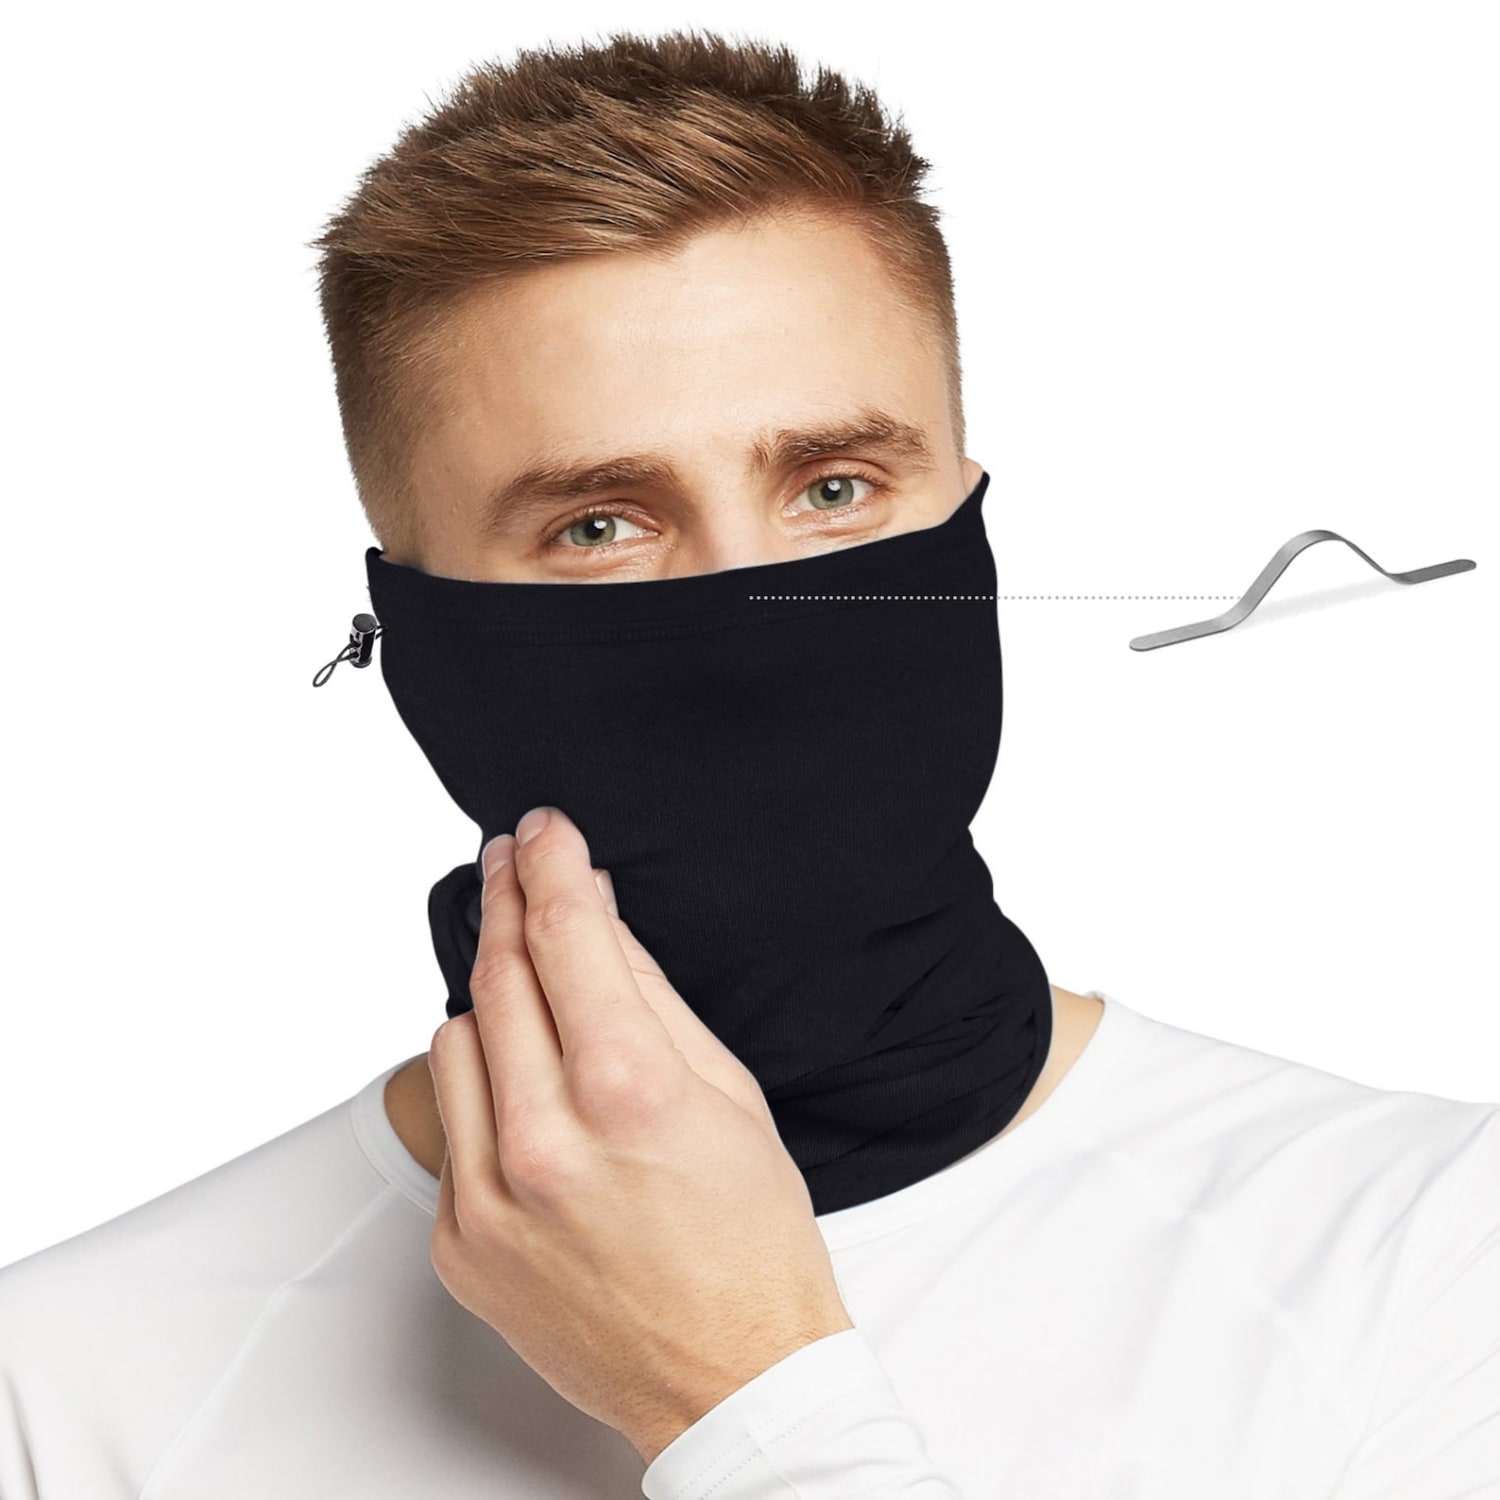 How to a neck gaiter protect against Covid